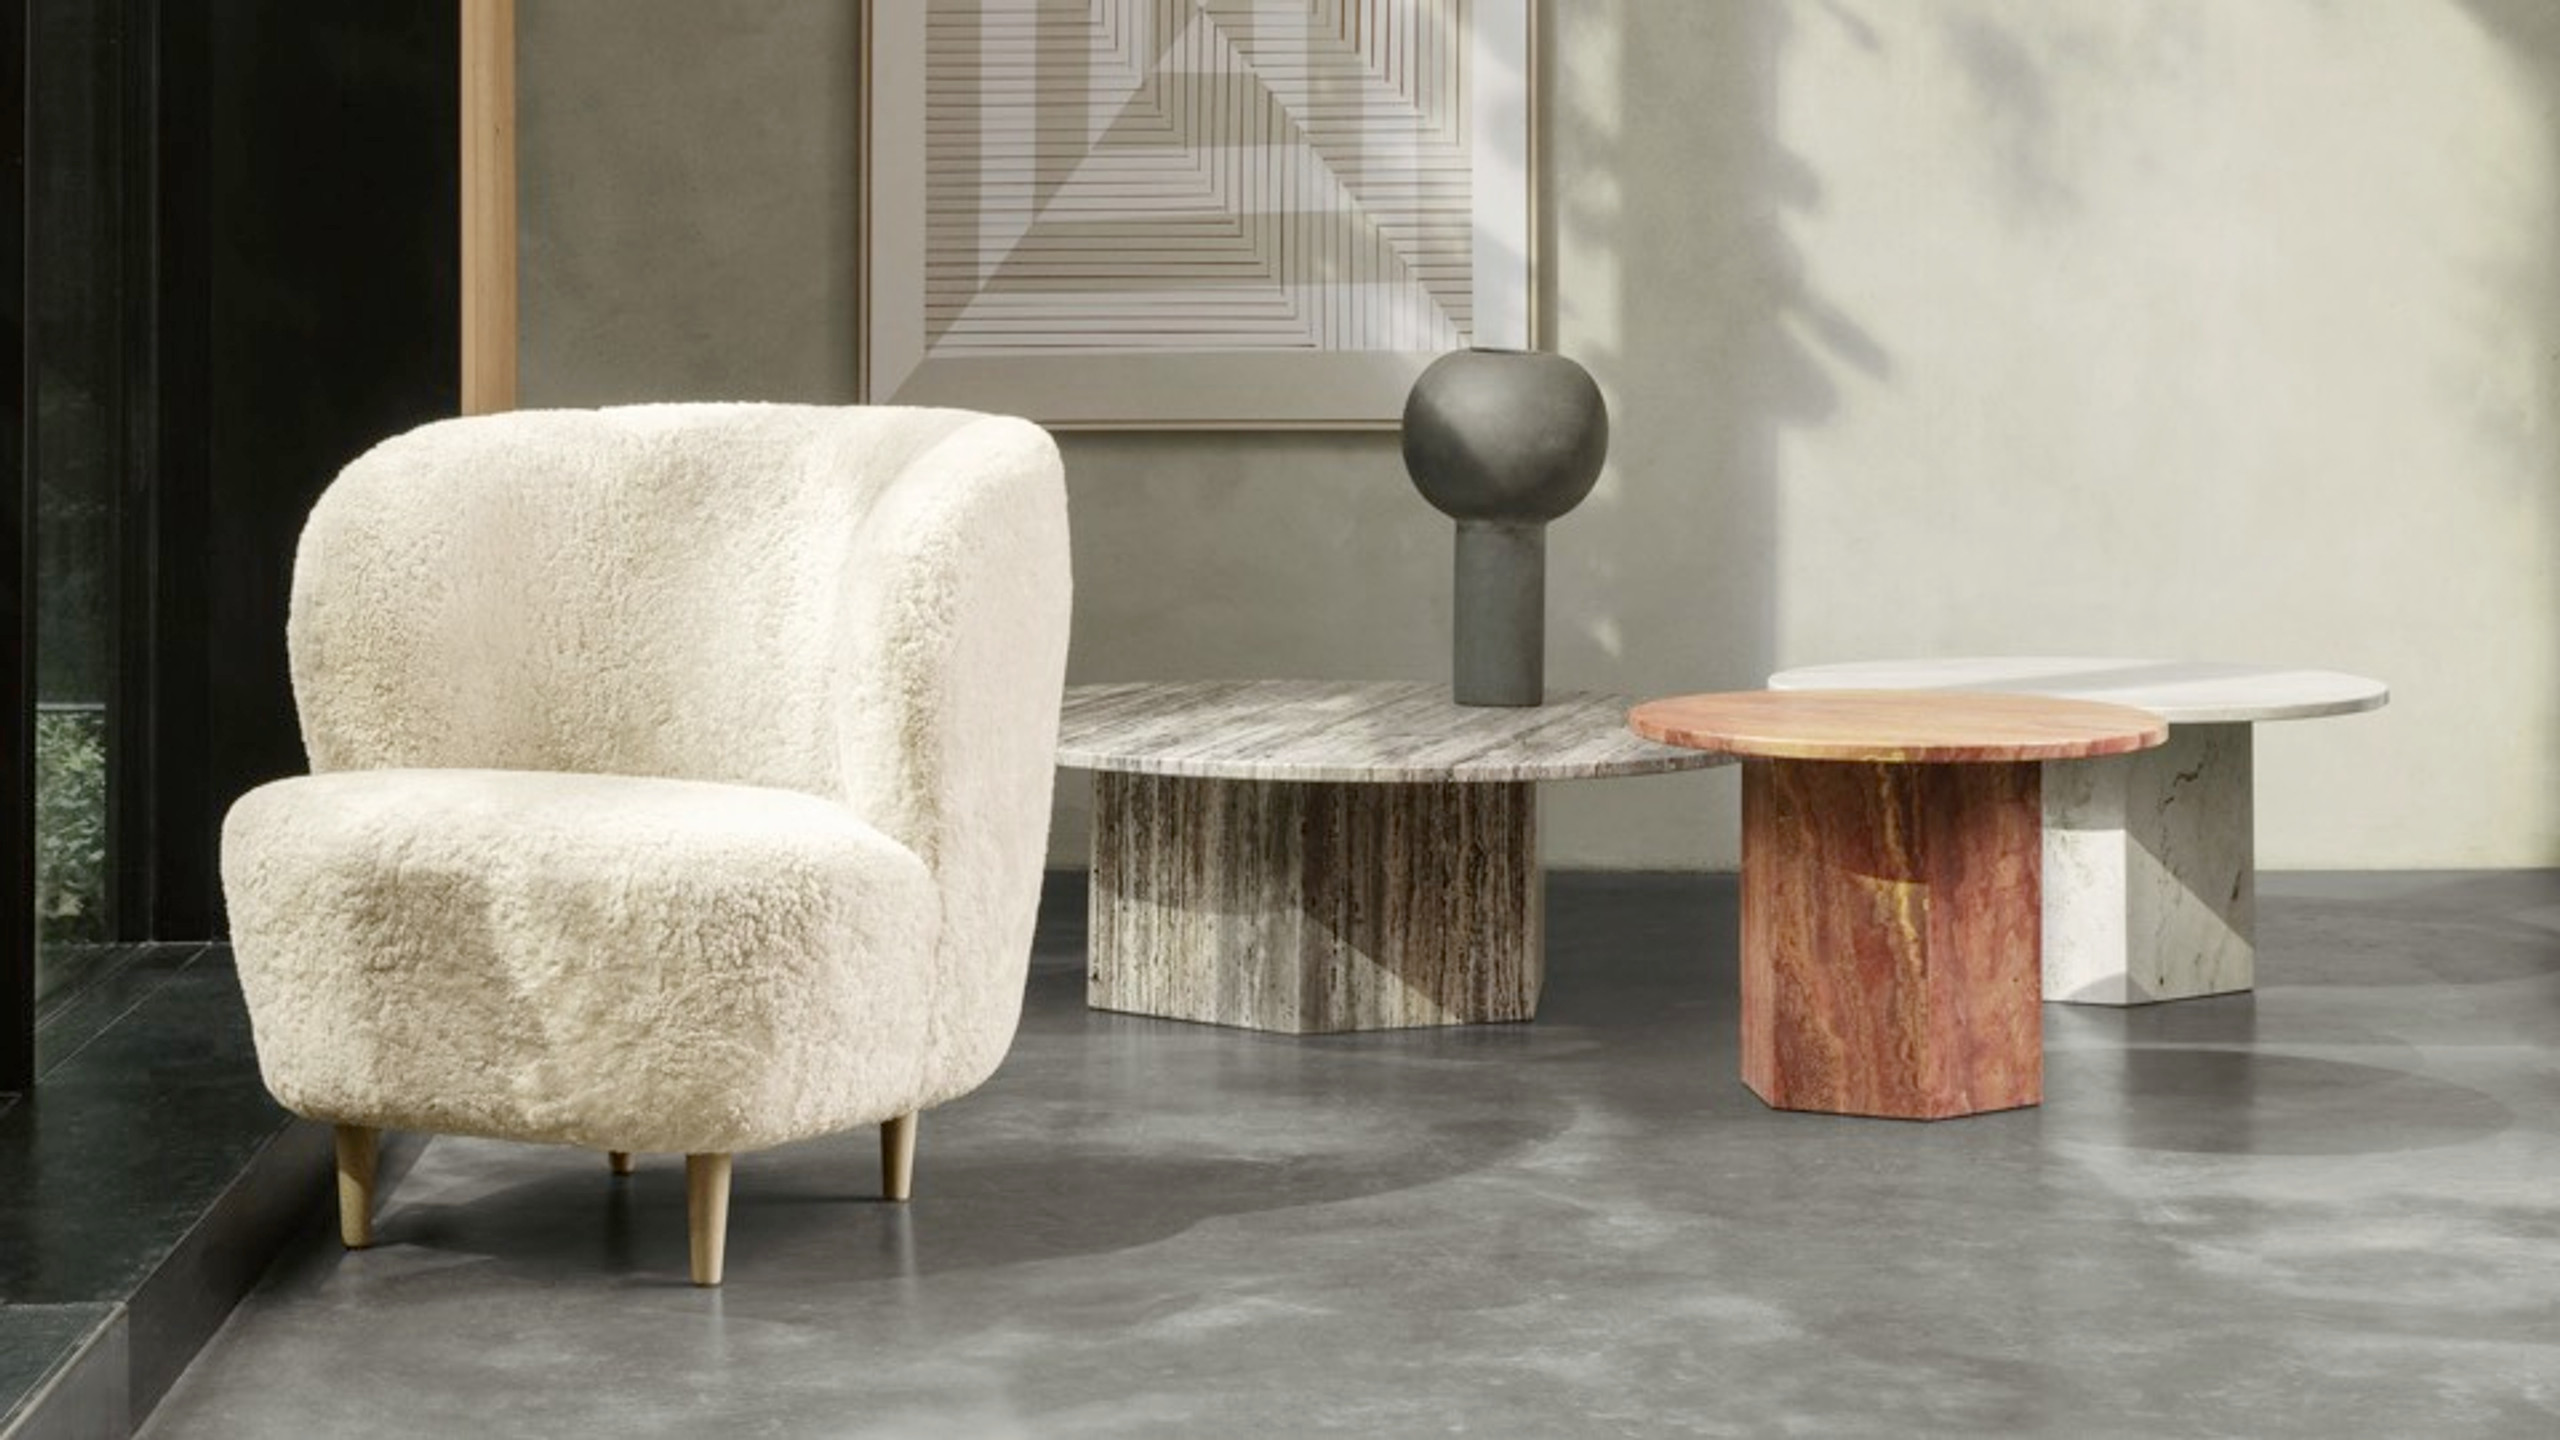 The Wonders of Wool: 15% Off Gubi’s New Stay Sheepskin Collection